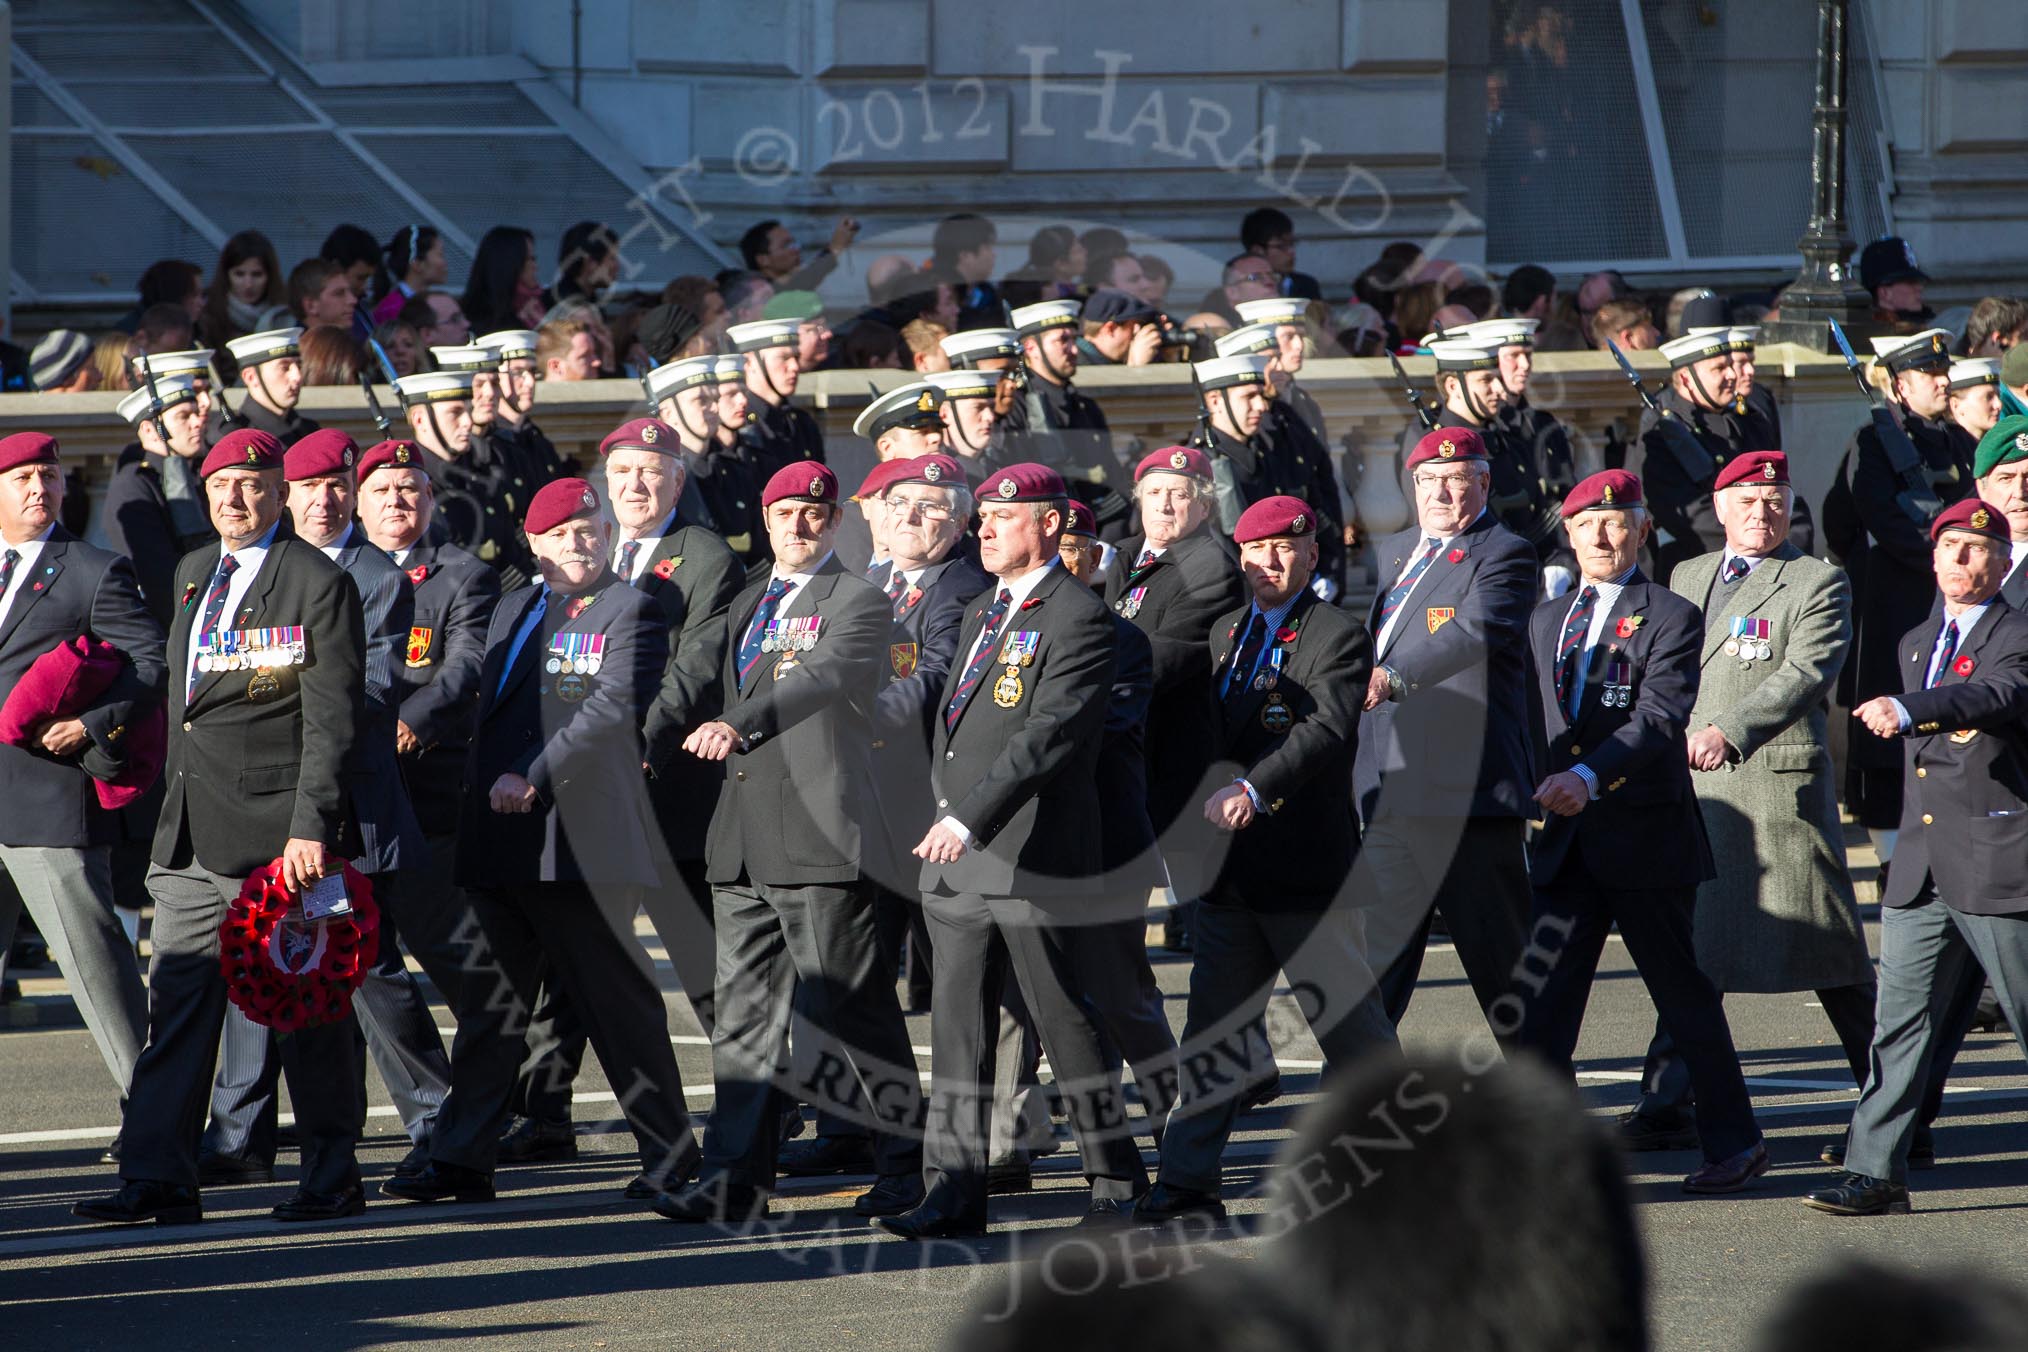 Remembrance Sunday 2012 Cenotaph March Past: Group B28 - Airborne Engineers Association..
Whitehall, Cenotaph,
London SW1,

United Kingdom,
on 11 November 2012 at 11:59, image #996